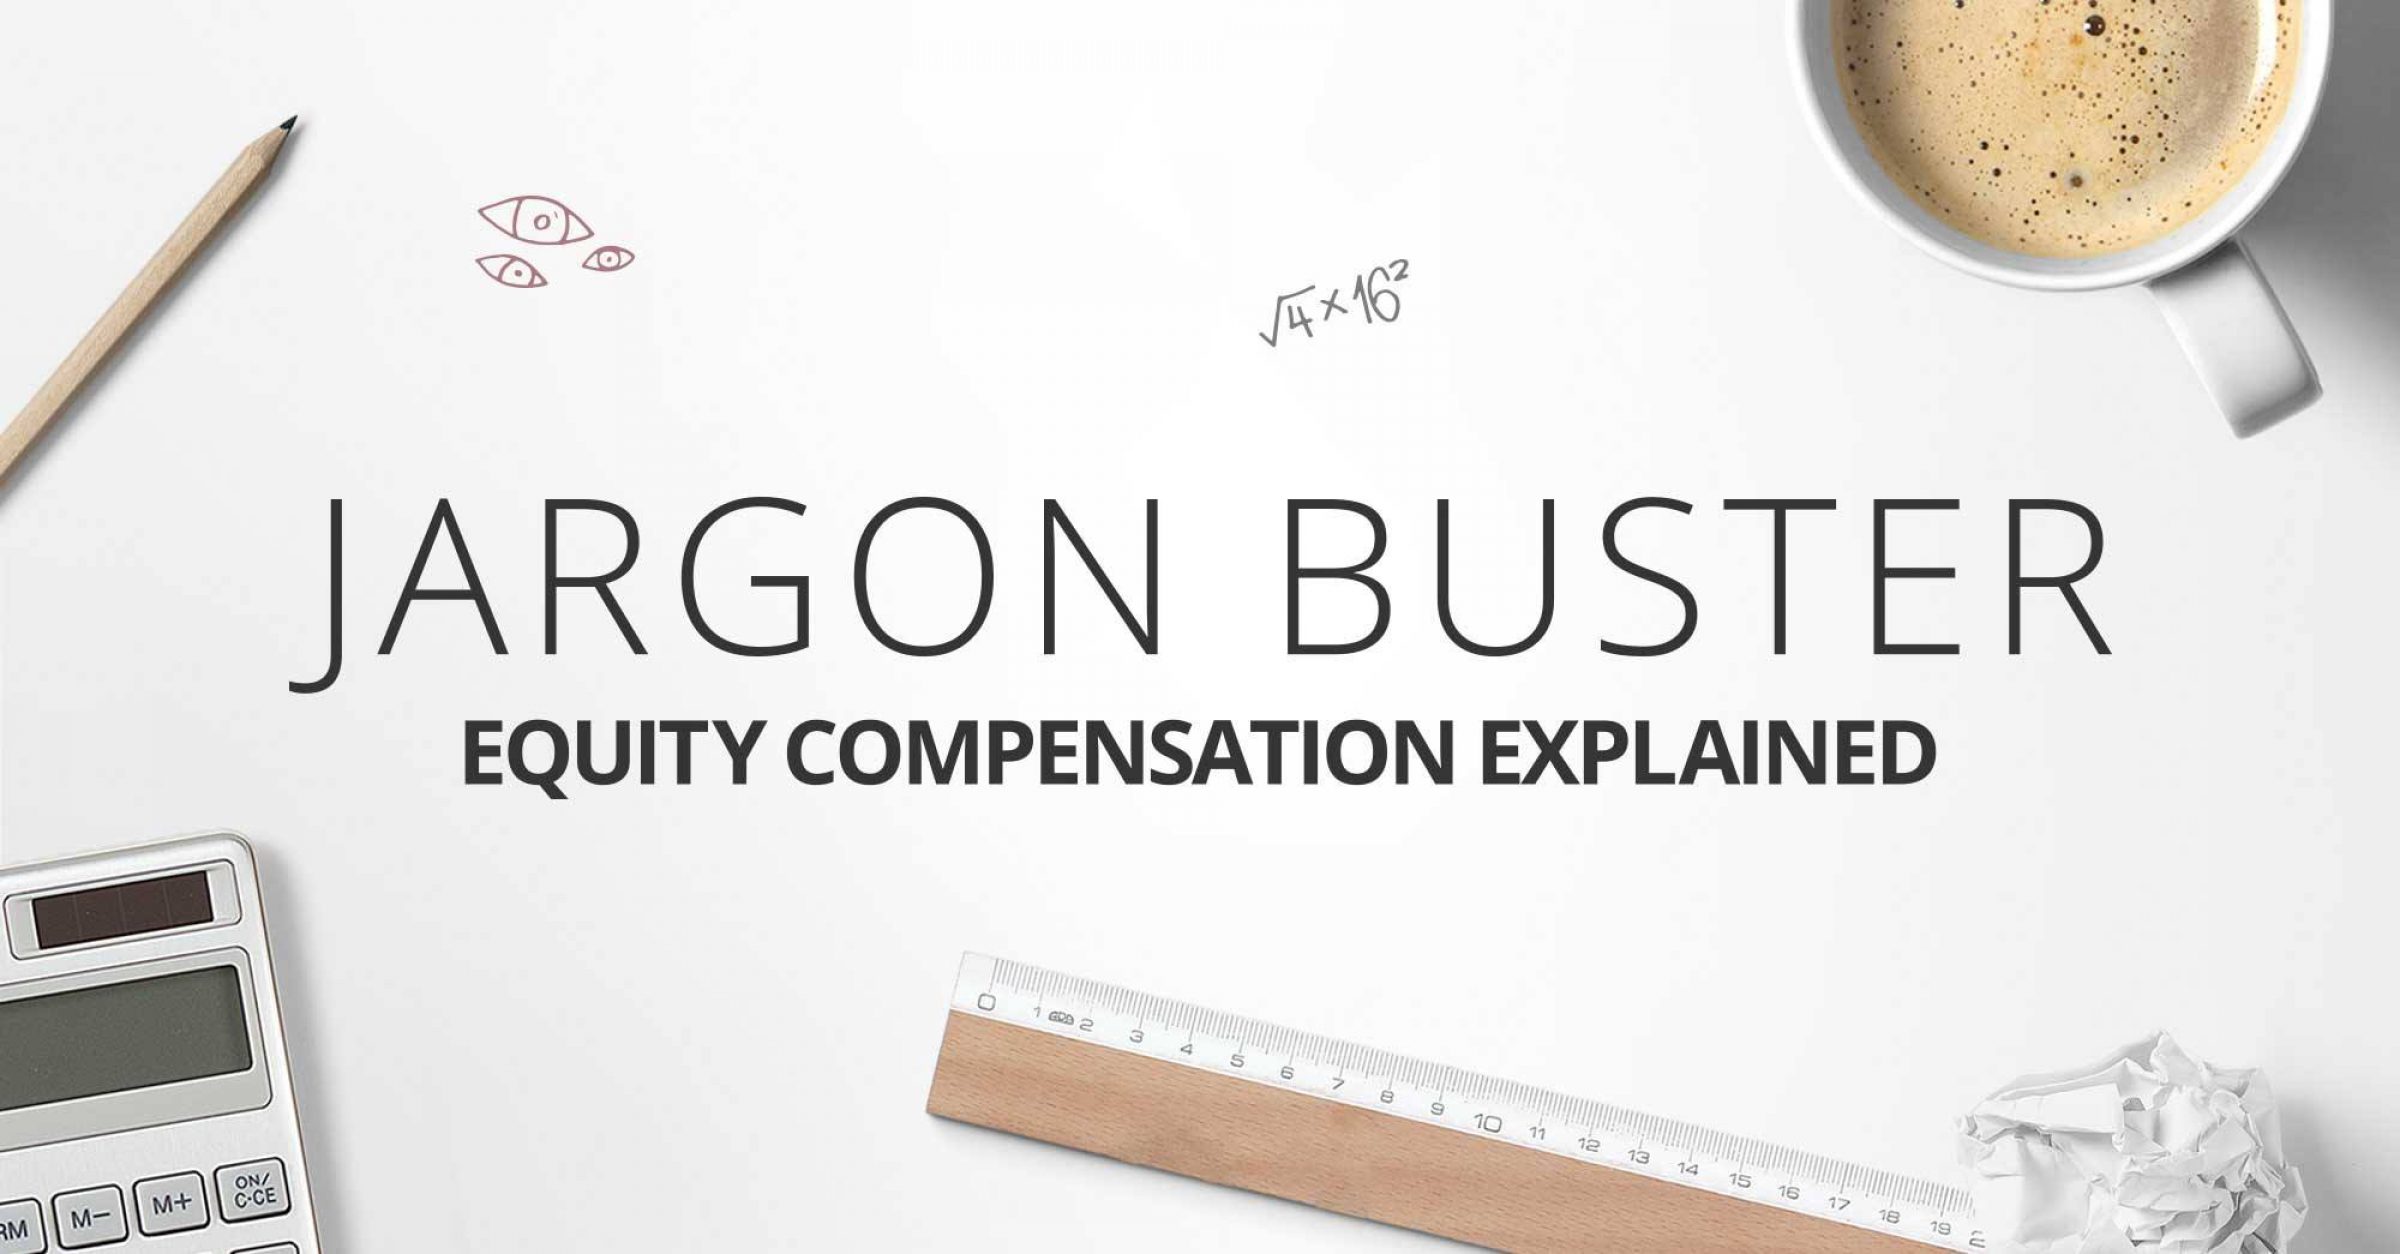 Jargon buster: Equity compensation explained